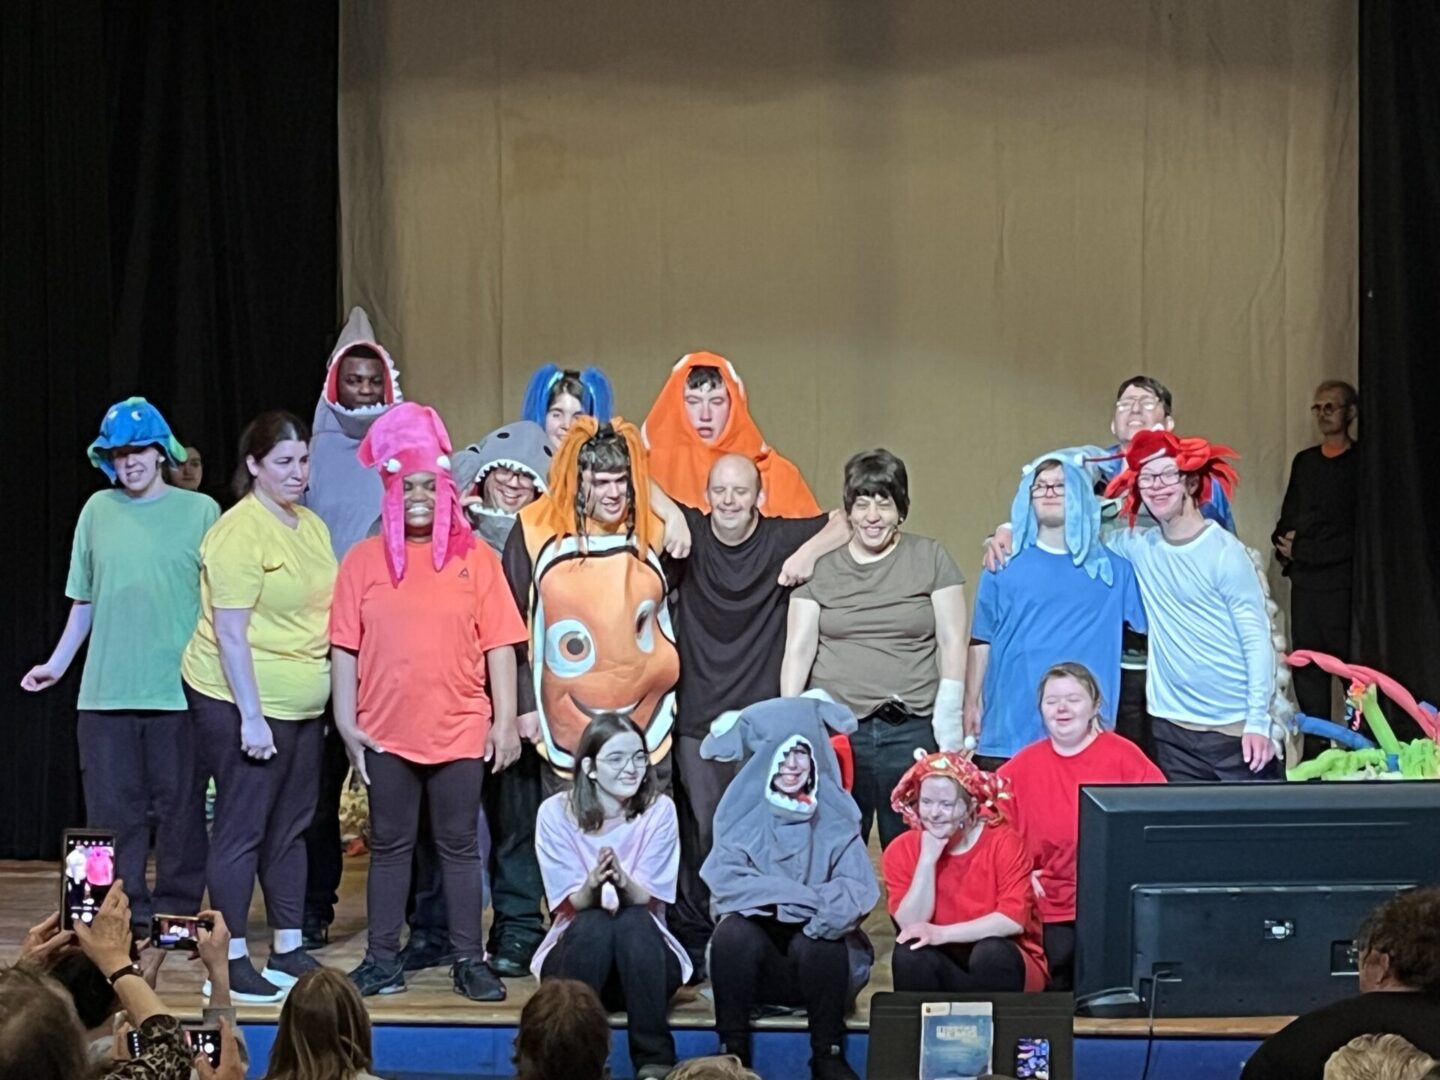 All Abilities SRO PLUS cast photo for their performance of Finding Nemo Jr.